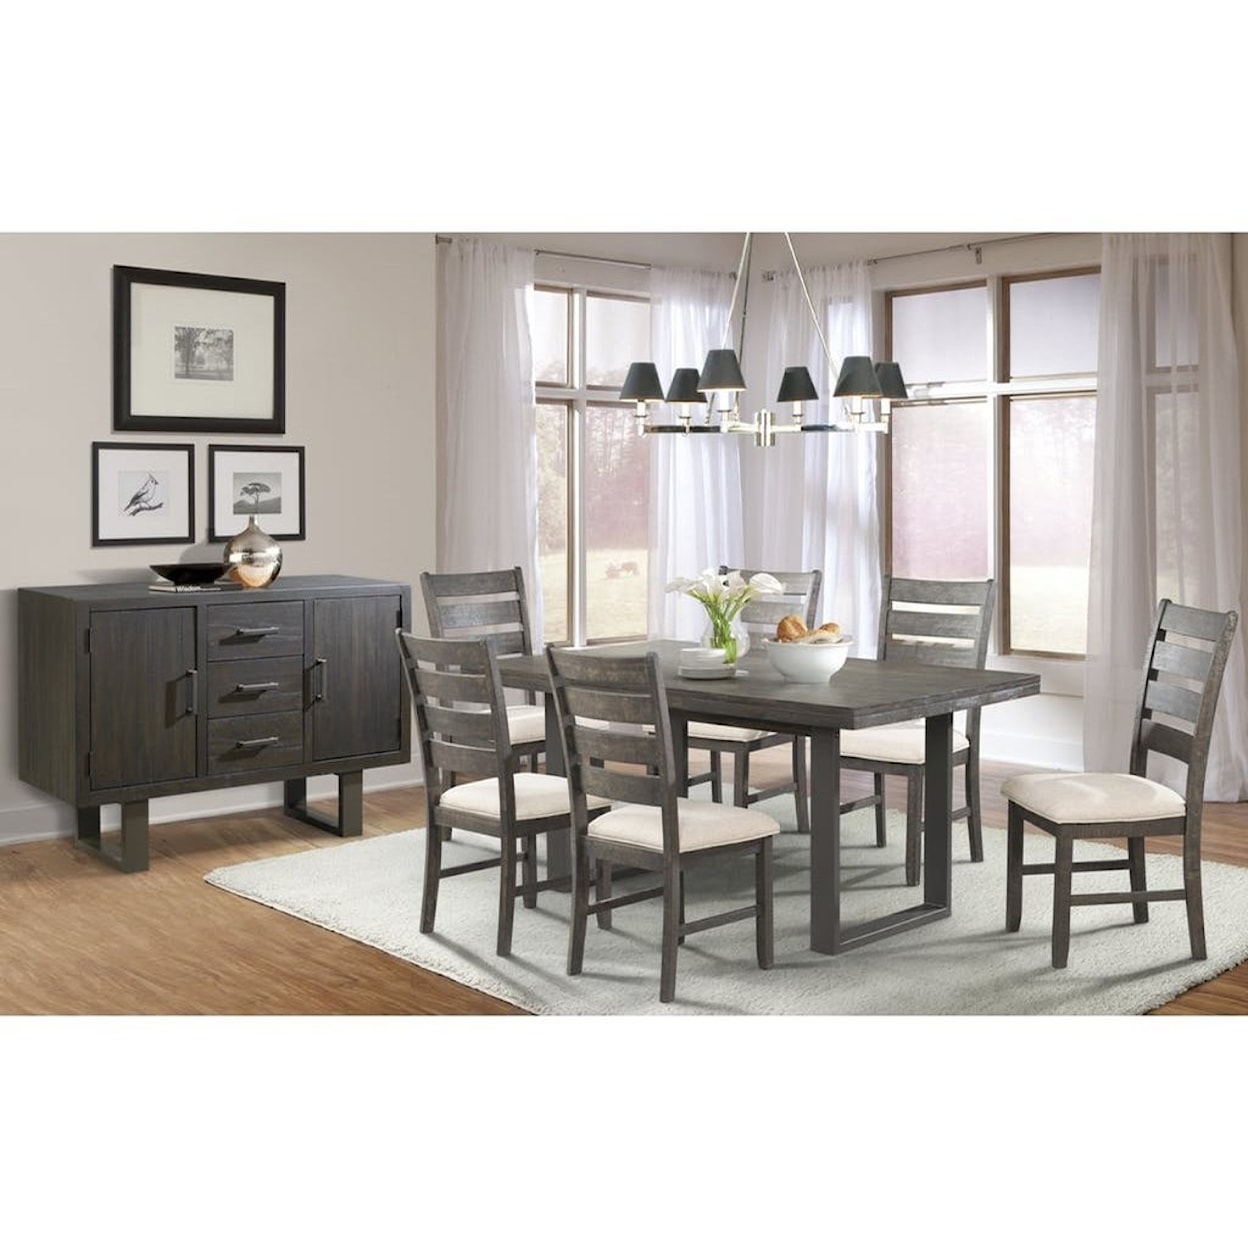 Elements International Sawyer Dining Group with Six Chairs